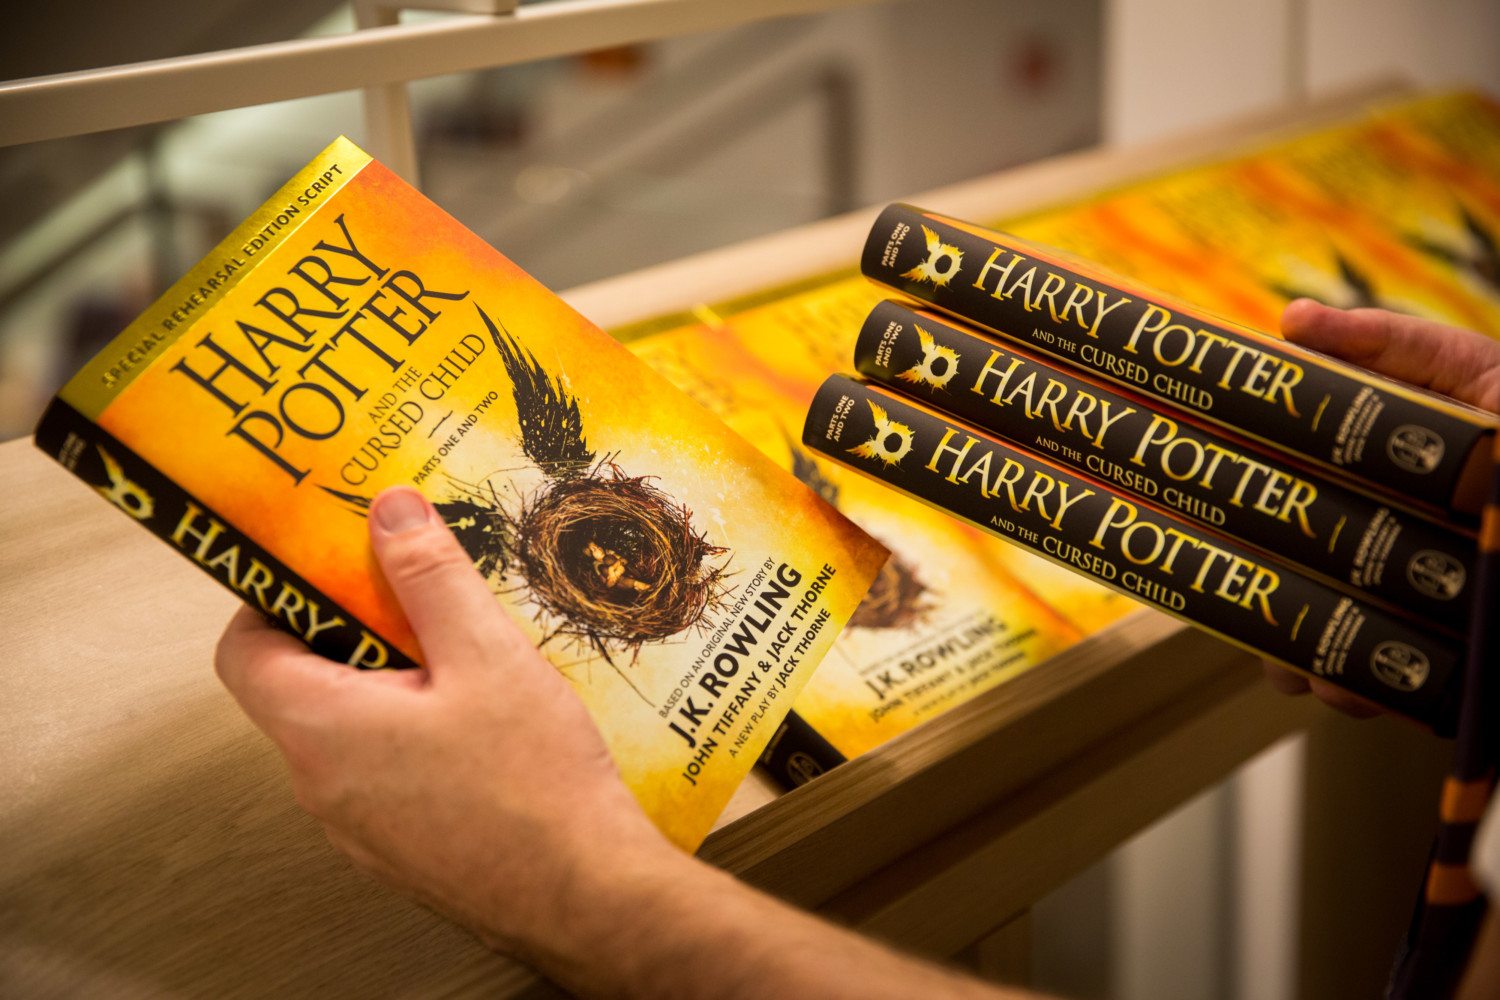 'Harry Potter And The Cursed Child' - Book Release At Foyles